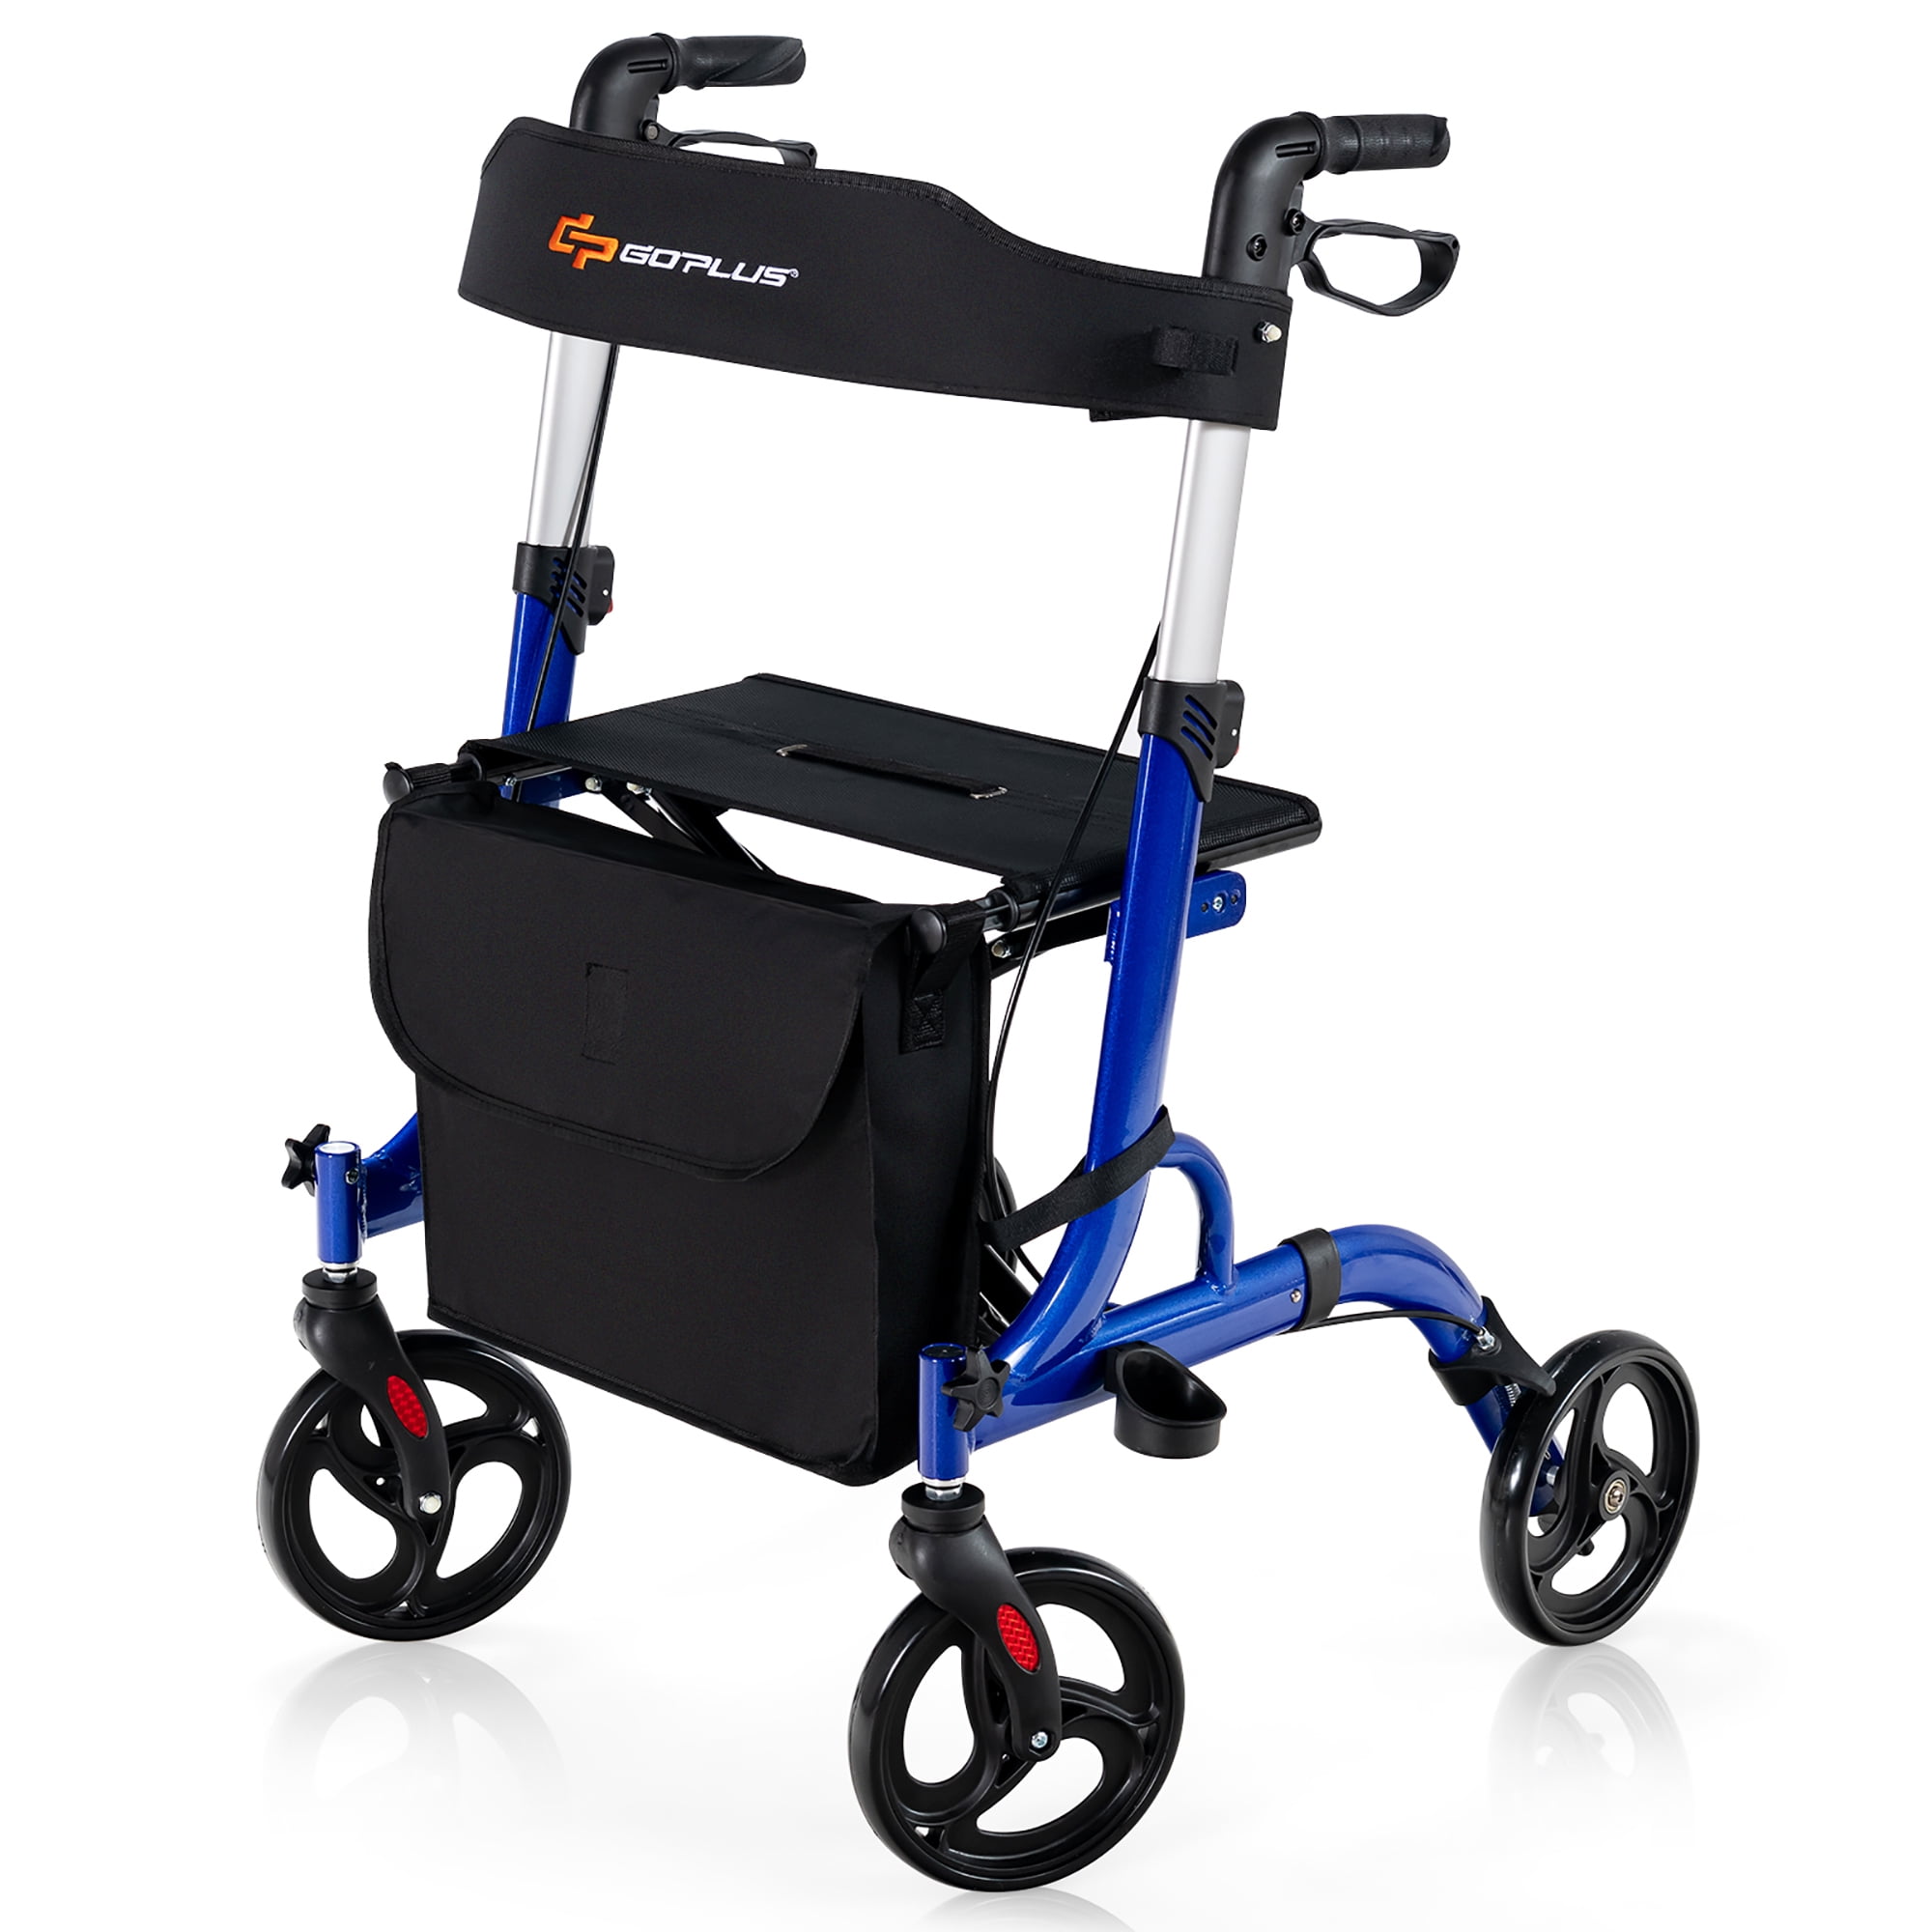 Lightweight Folding Upright Walker,Shopping Trolley with Padded Seat Foldable Pedals Adjustable Height Rollator and Large Capacity Storage Bag Aluminum for Seniors Outdoor Trolley Exercise